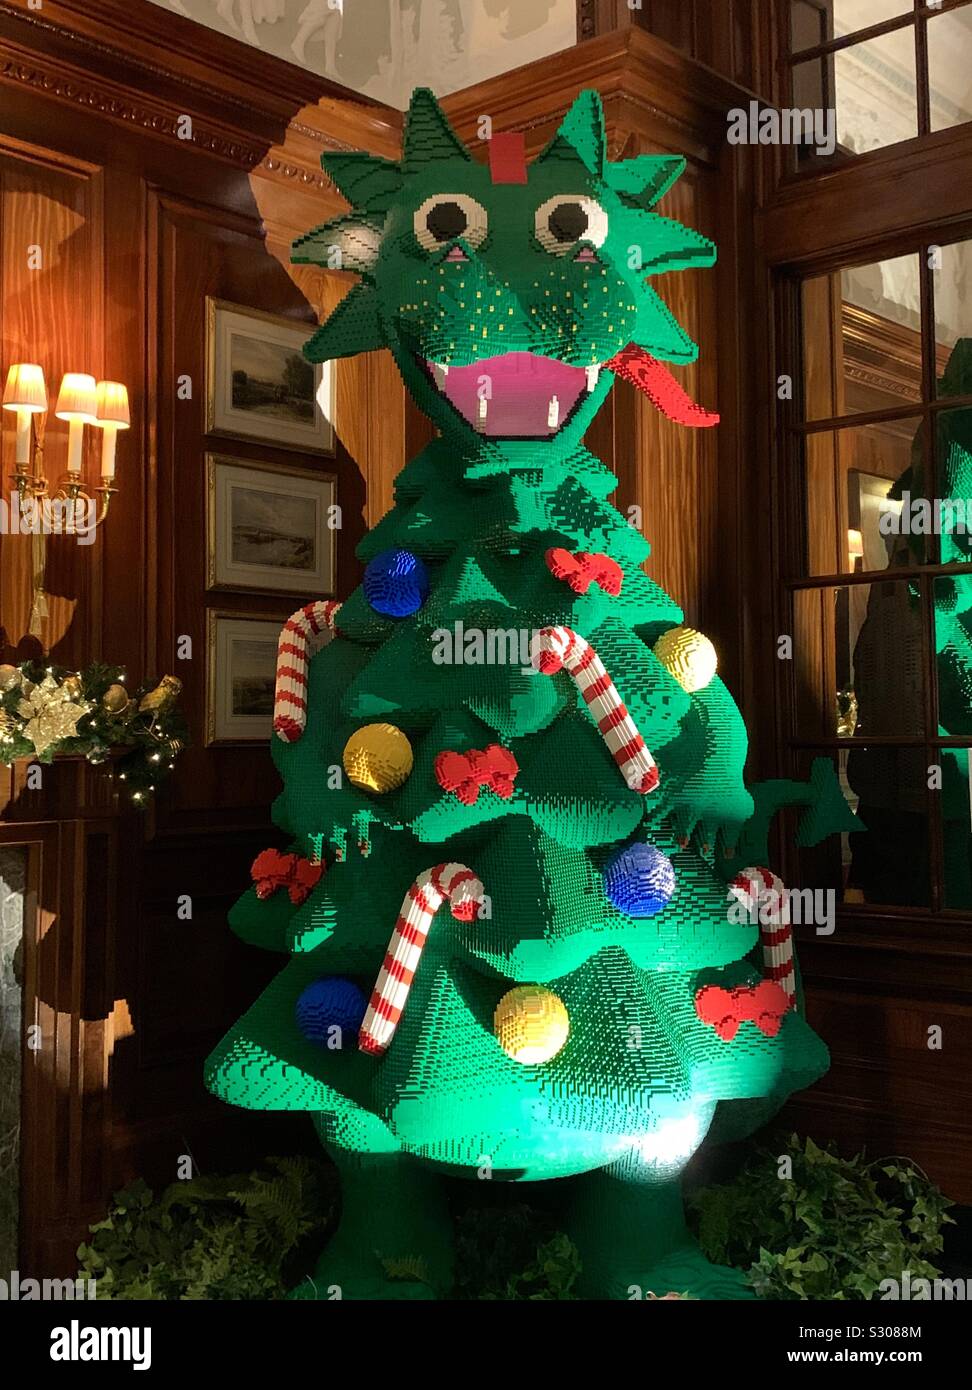 A very happy monster Christmas tree made of Lego, in a corner of the foyer  in The Savoy Hotel, London Stock Photo - Alamy